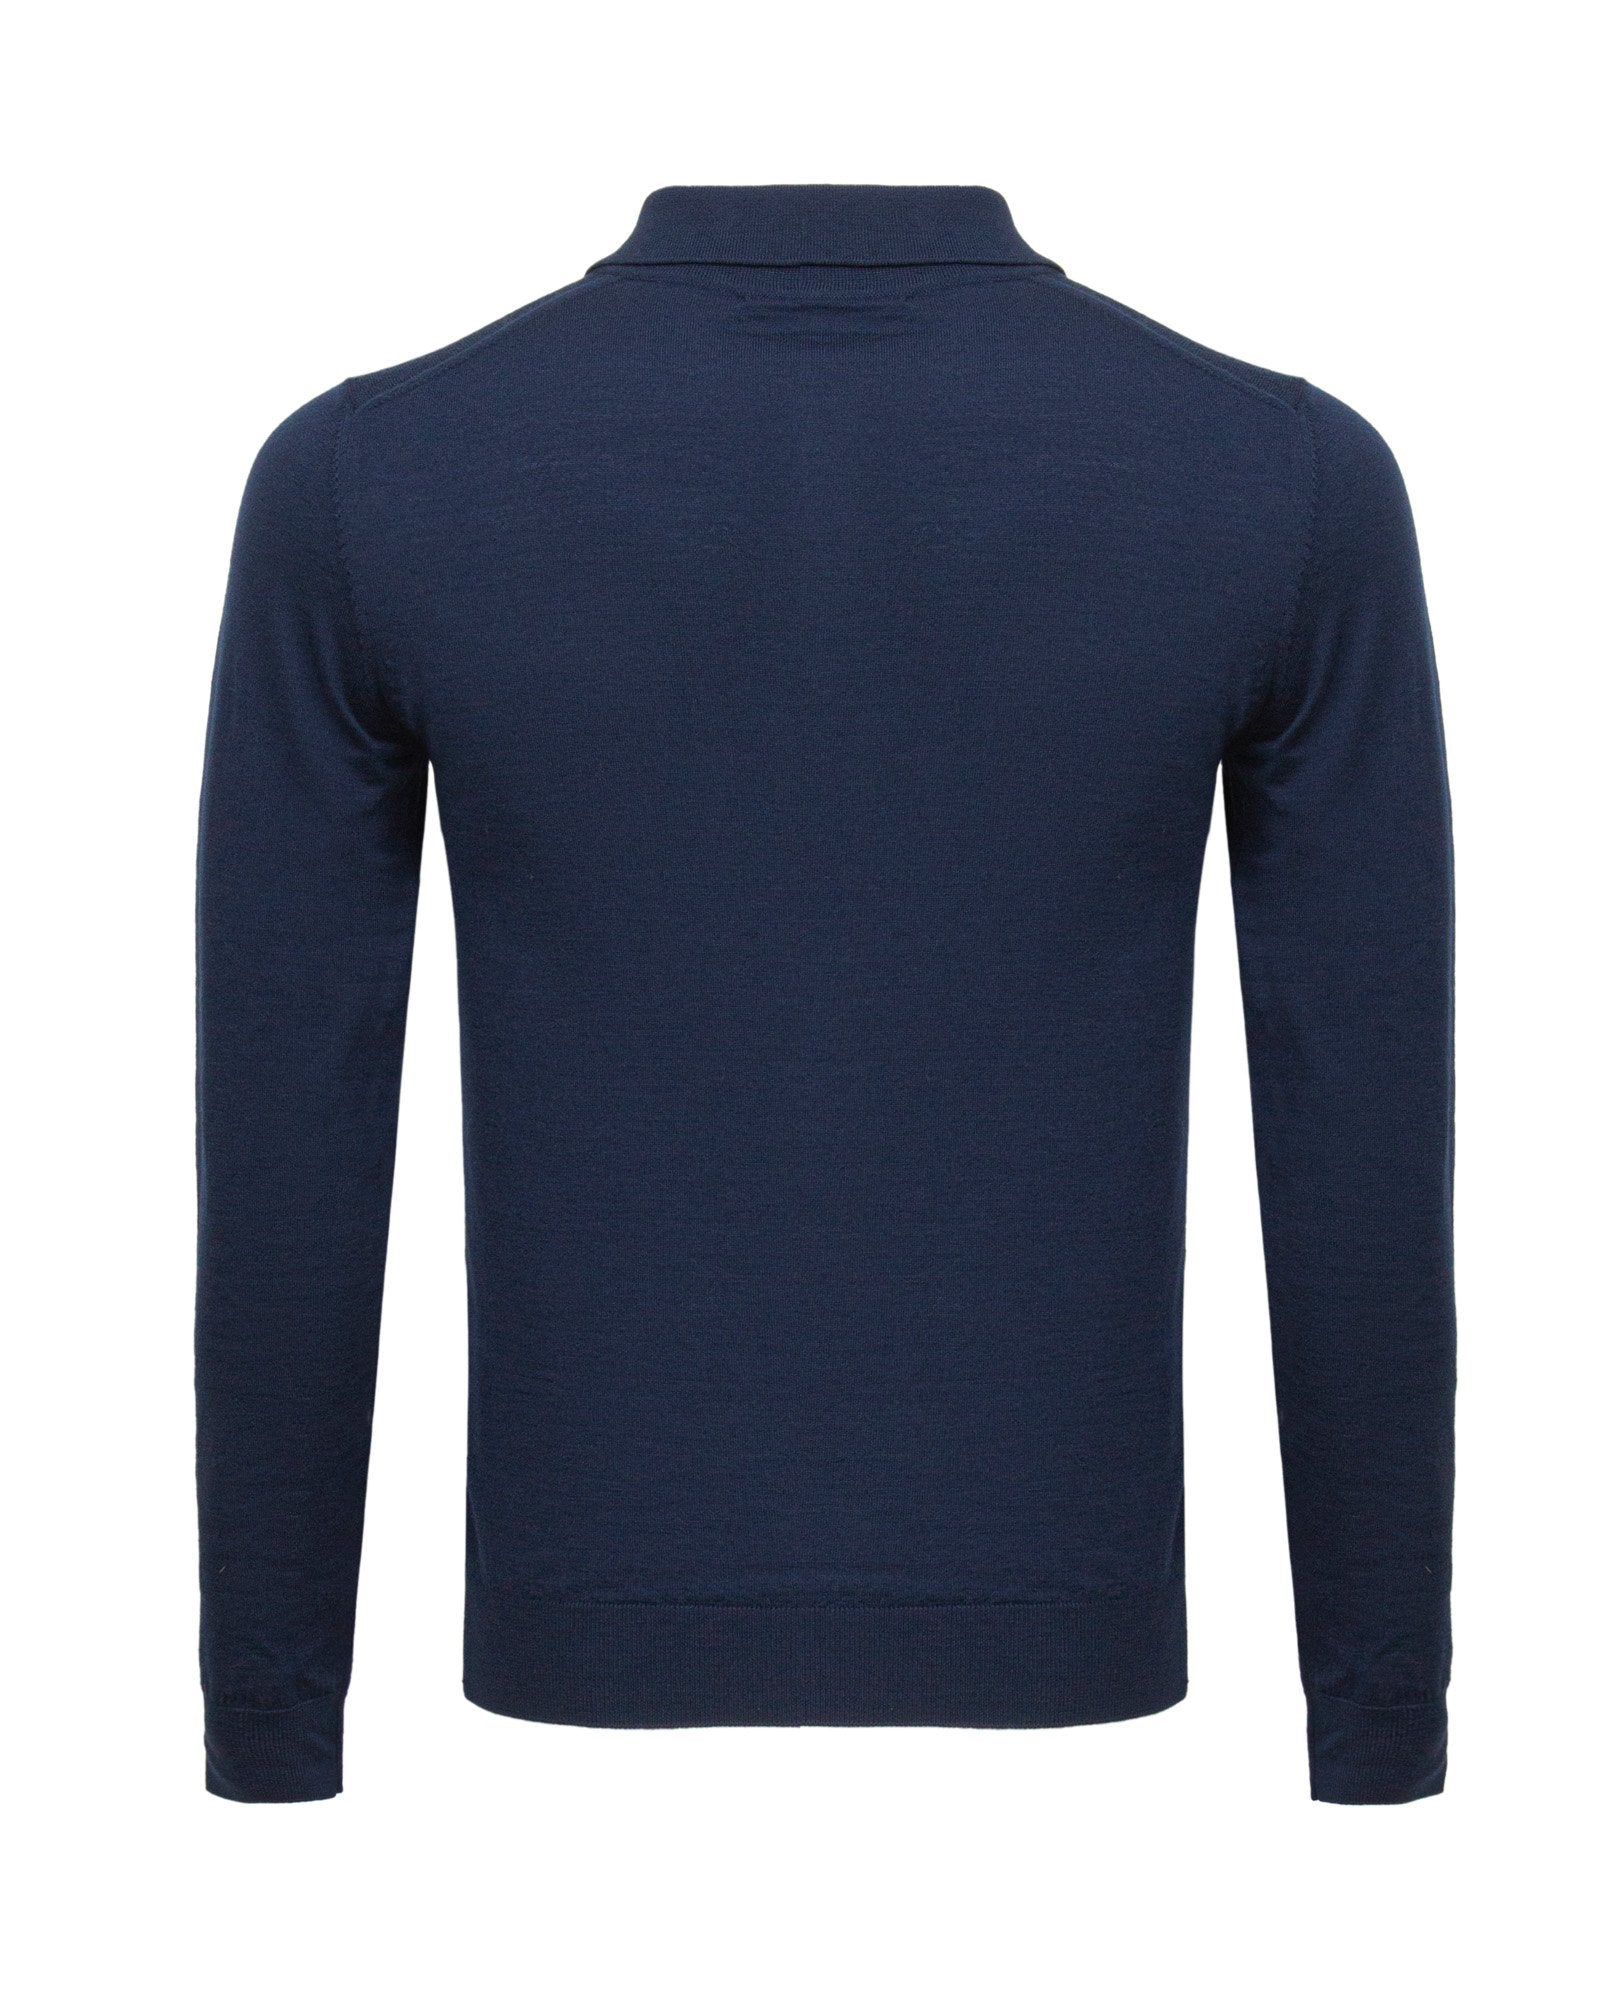 Navy Blue Cashmere Sweater